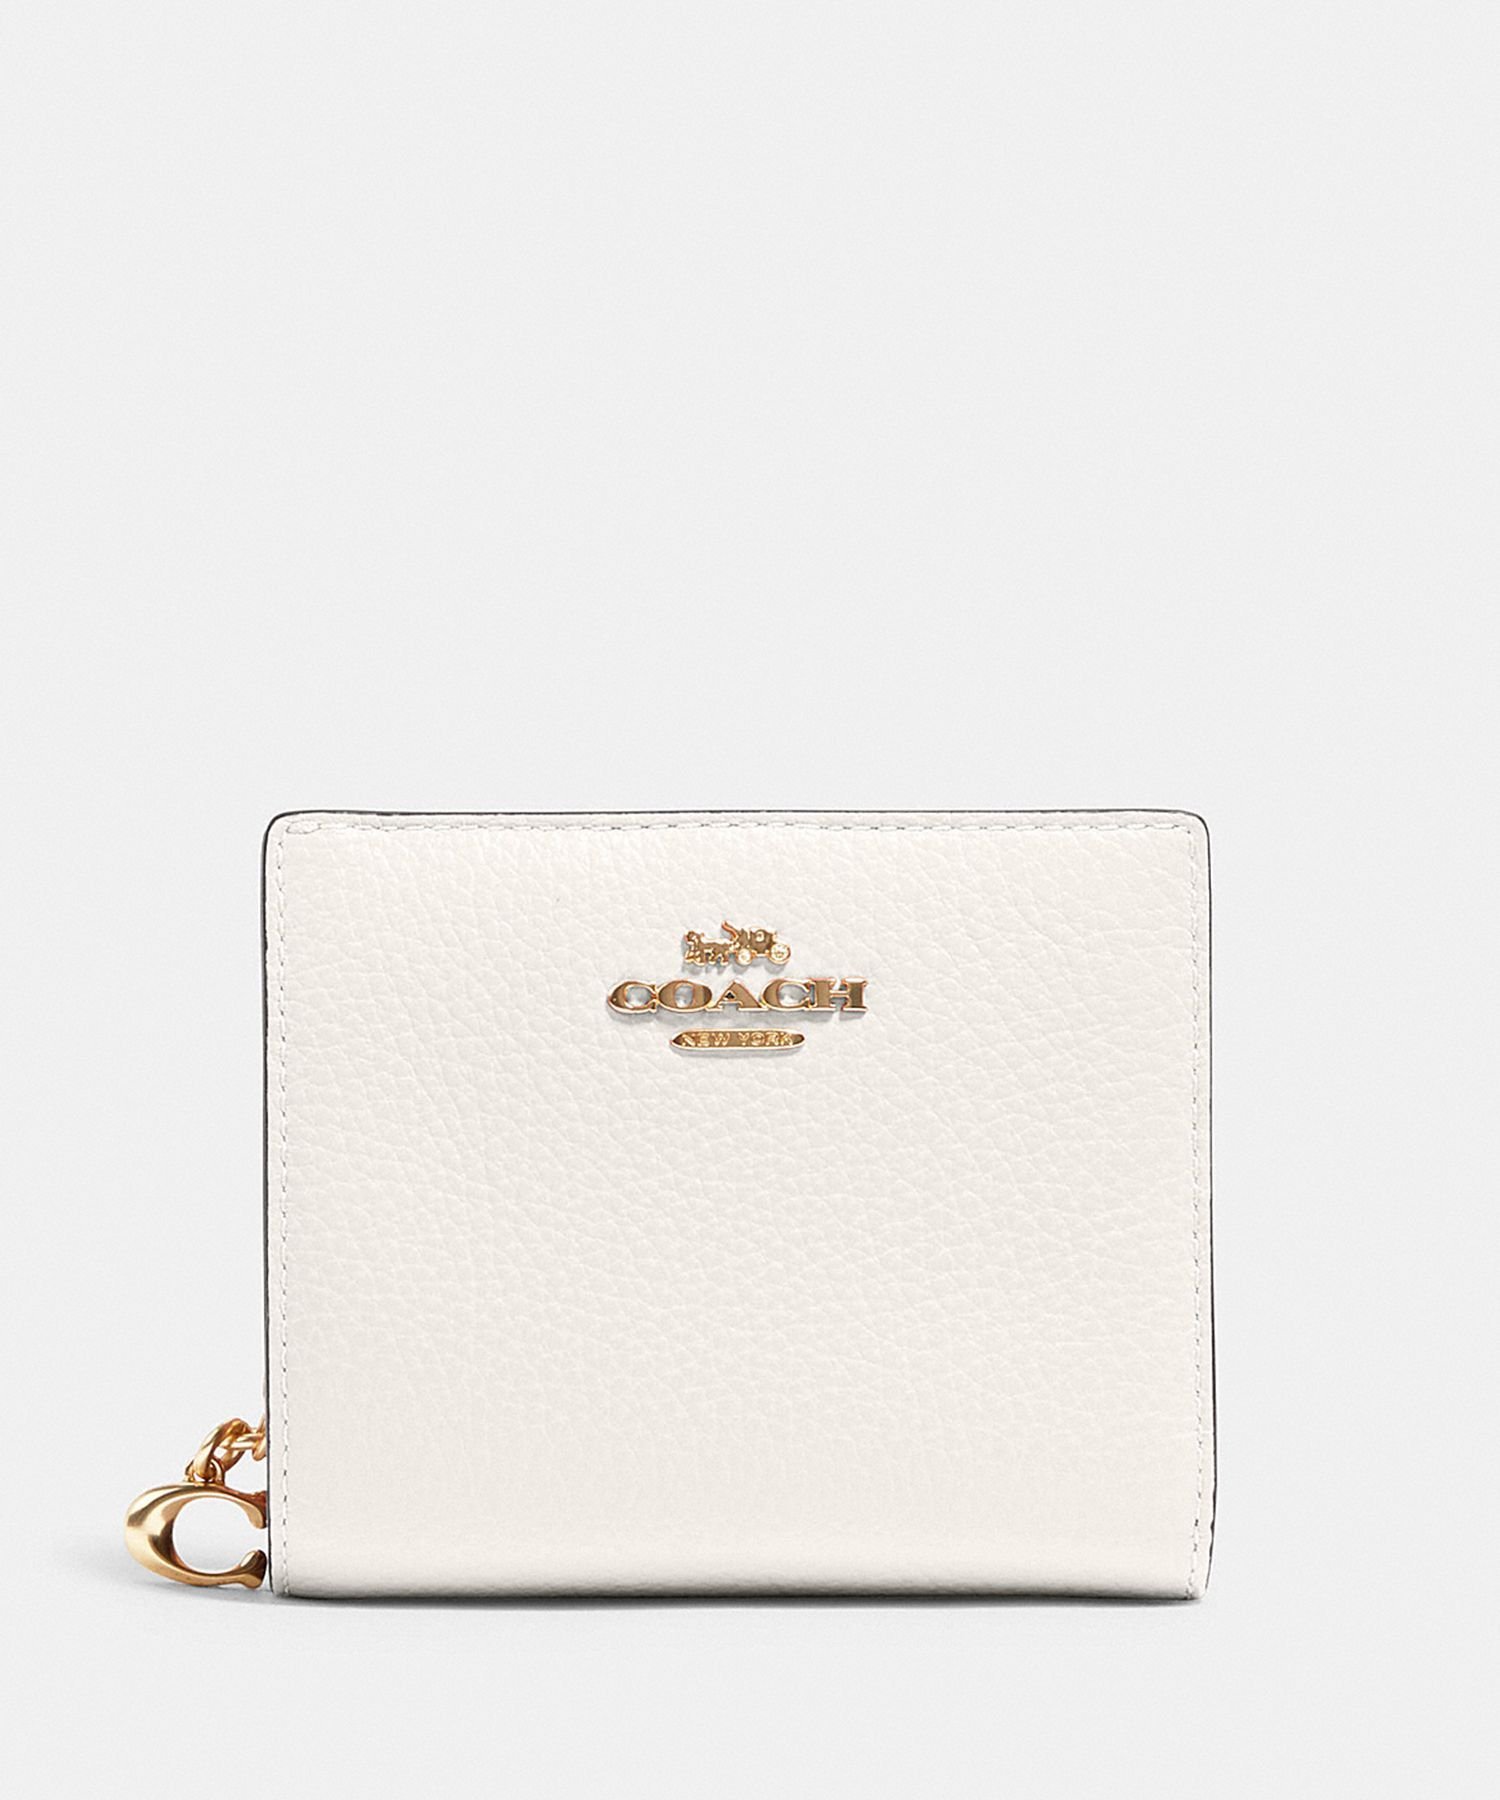 【SALE／62%OFF】COACH OUTLET スナップ ウォレット コーチ　アウトレット 財布・ポーチ・ケース 財布 ホワイト【送料無料】